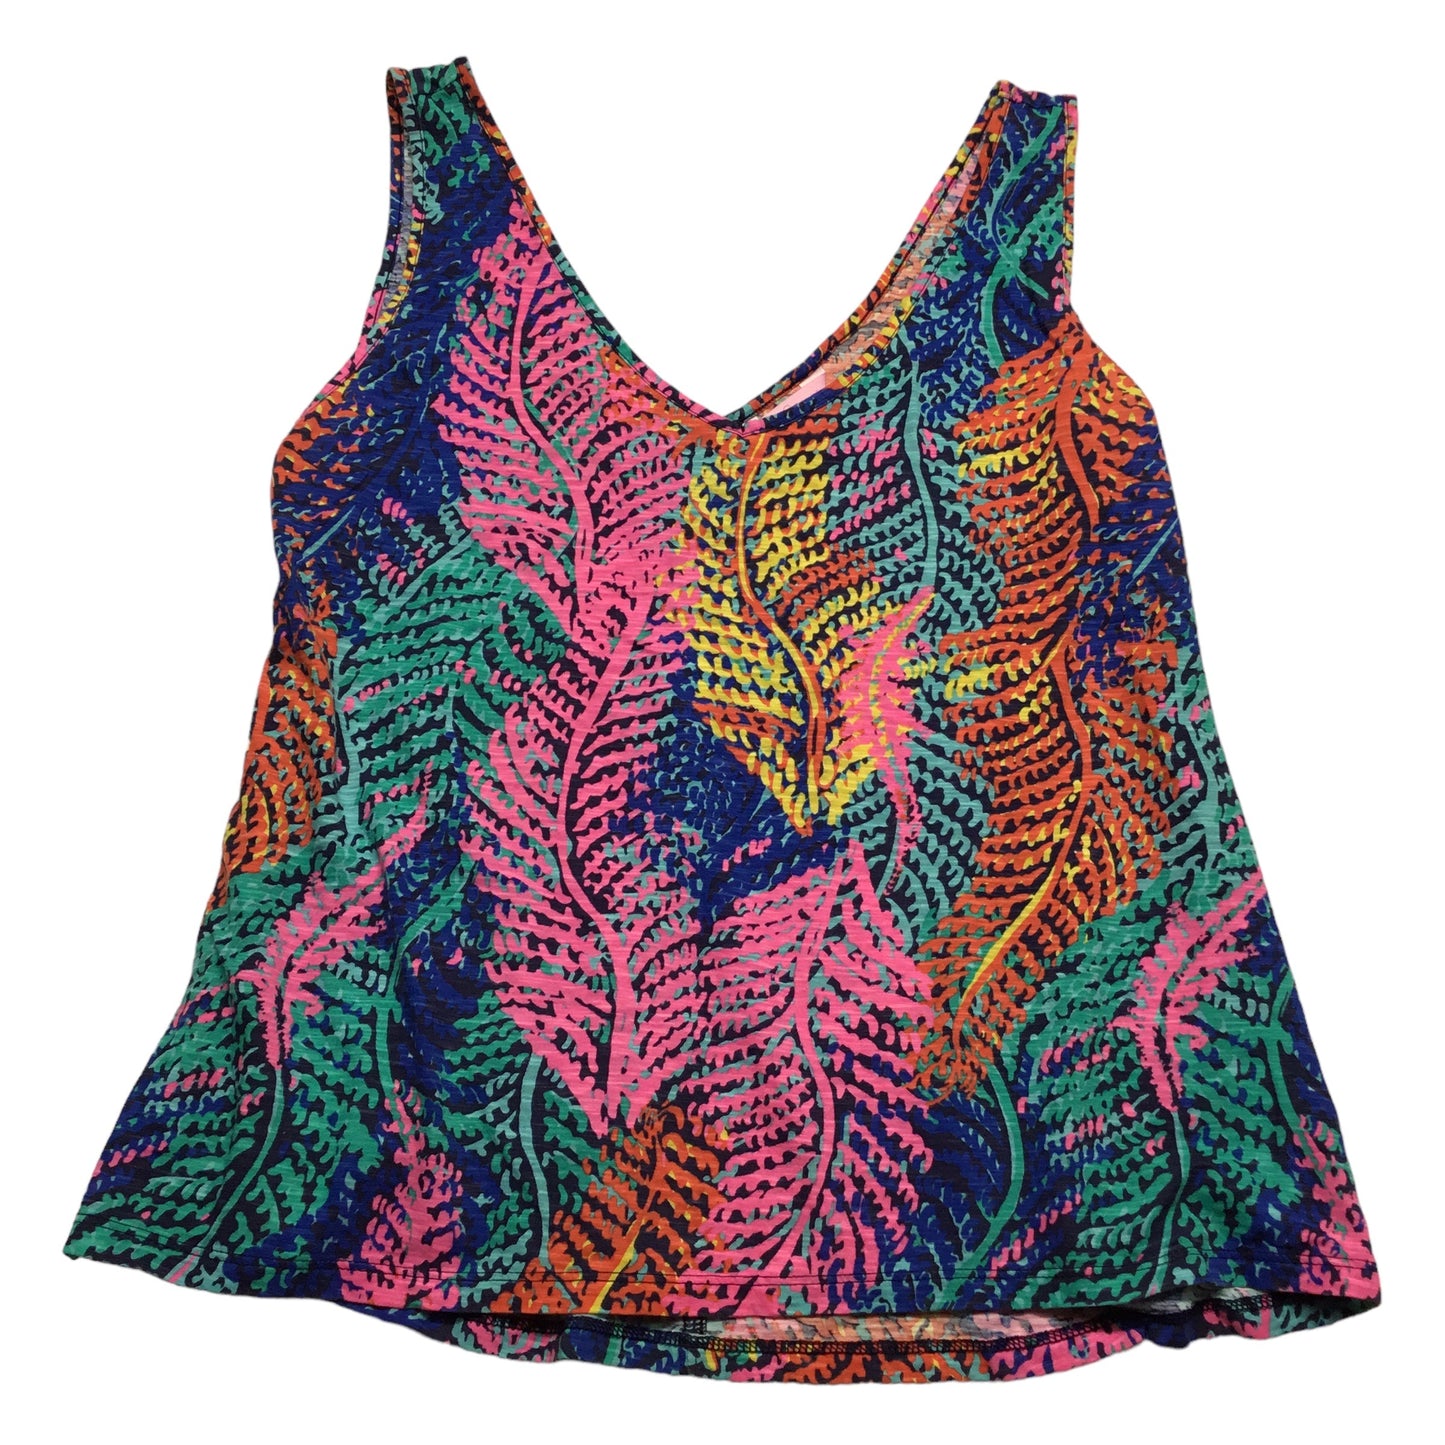 Top Sleeveless By Lilly Pulitzer  Size: L